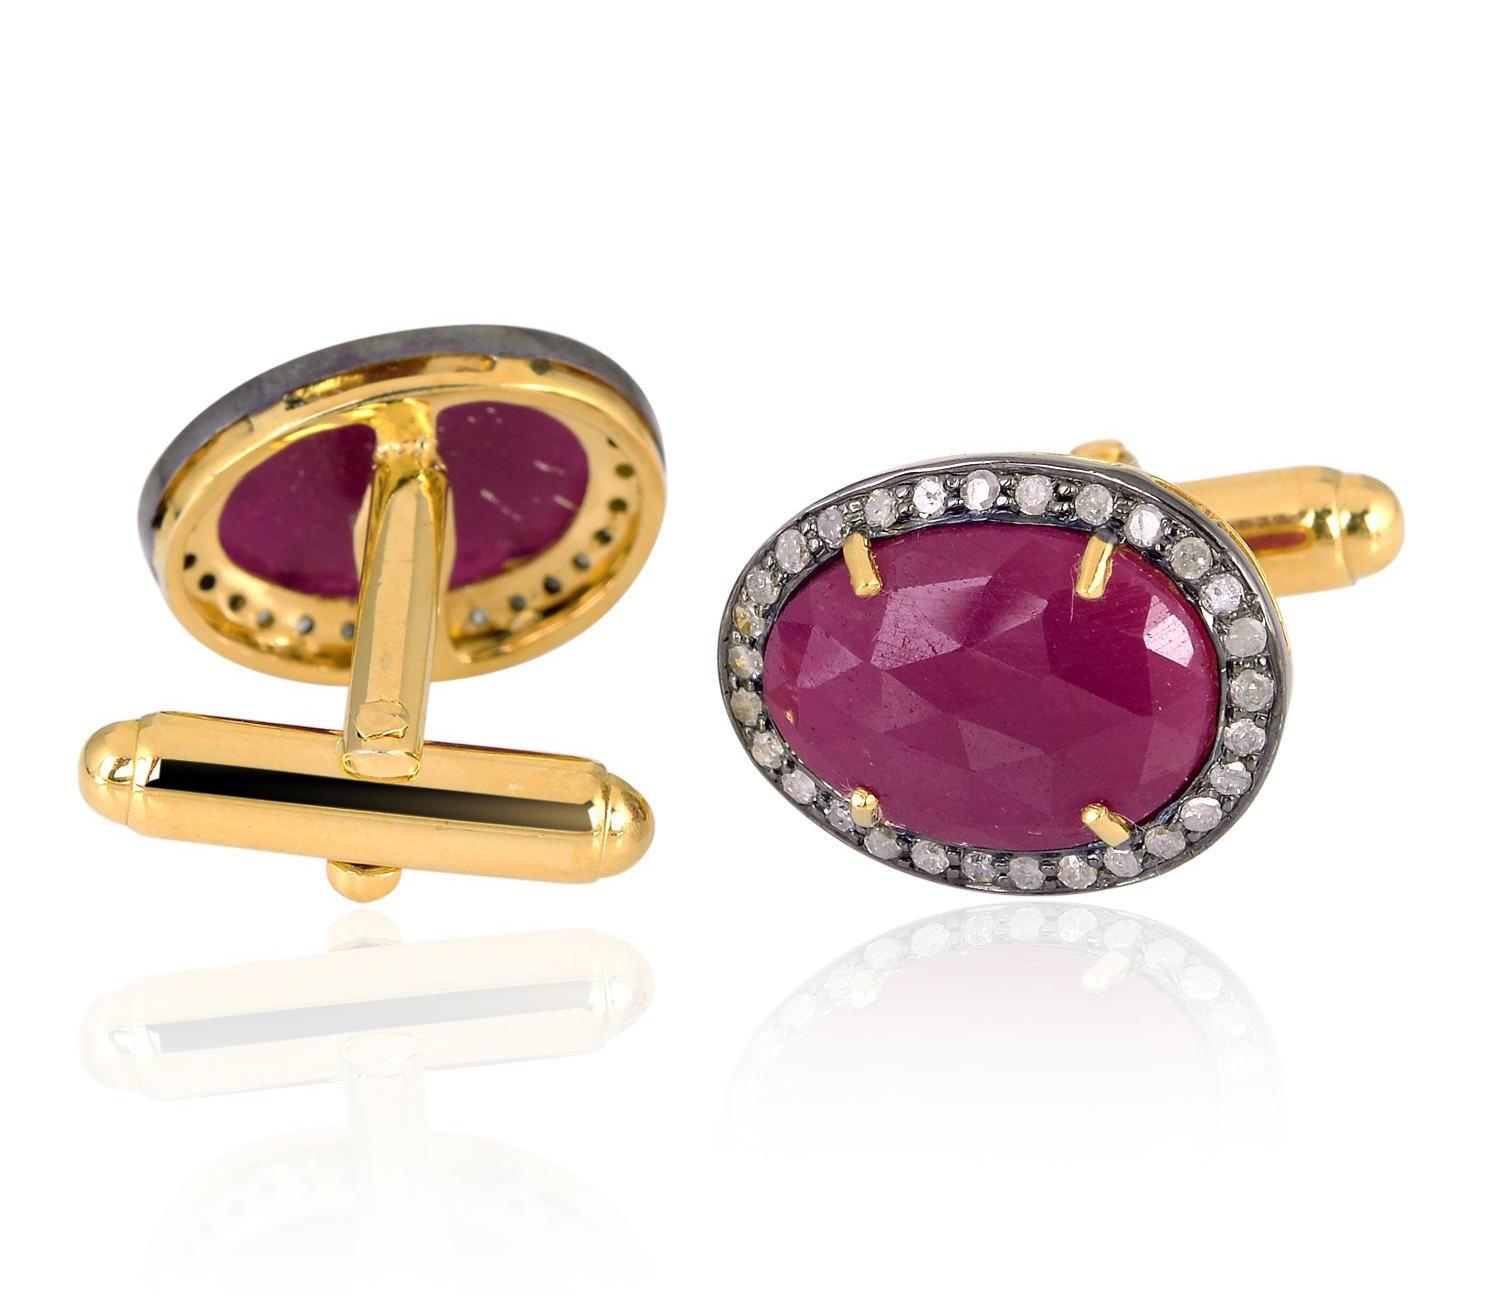 Cast from 18-karat gold and sterling silver, these cuff links are hand set with 3.65 carats Ruby and .56 carats of pave diamonds in blackened finish.

FOLLOW  MEGHNA JEWELS storefront to view the latest collection & exclusive pieces.  Meghna Jewels